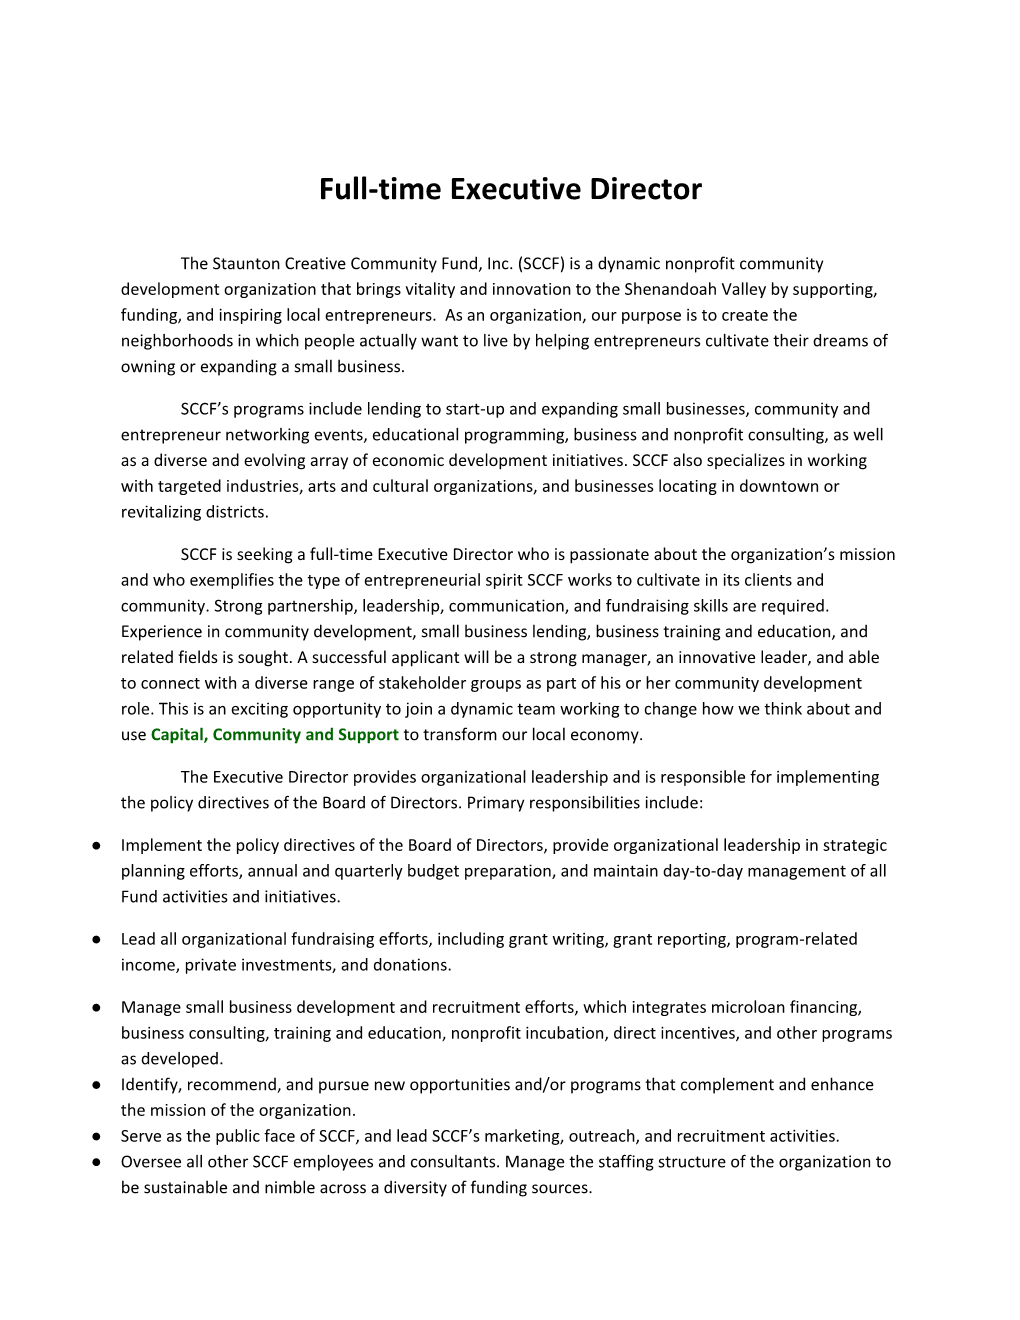 Full-Time Executive Director